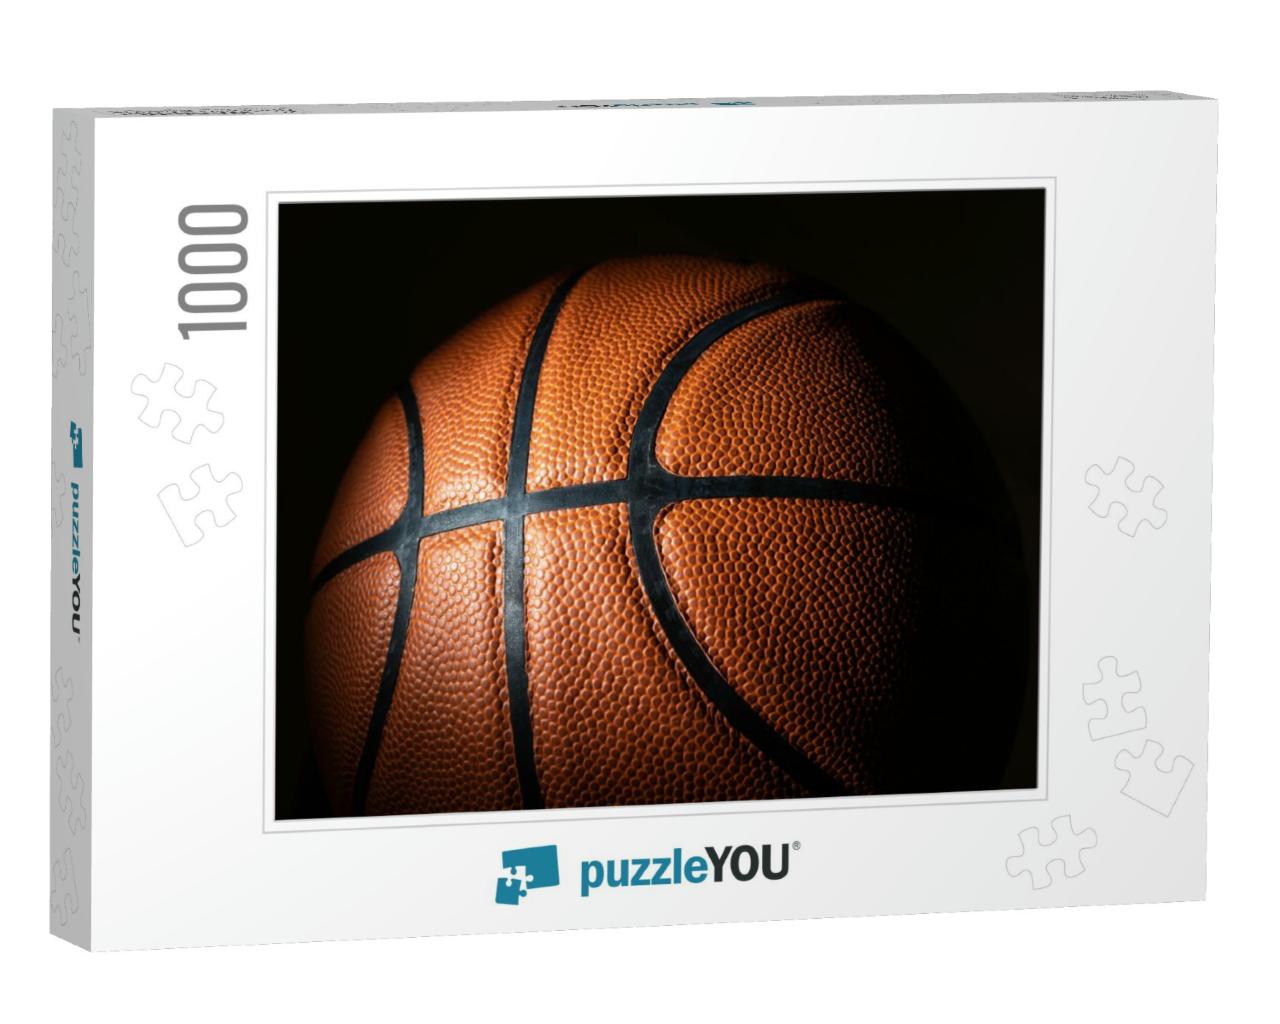 A Close-Up of a Leather Basketball on White... Jigsaw Puzzle with 1000 pieces